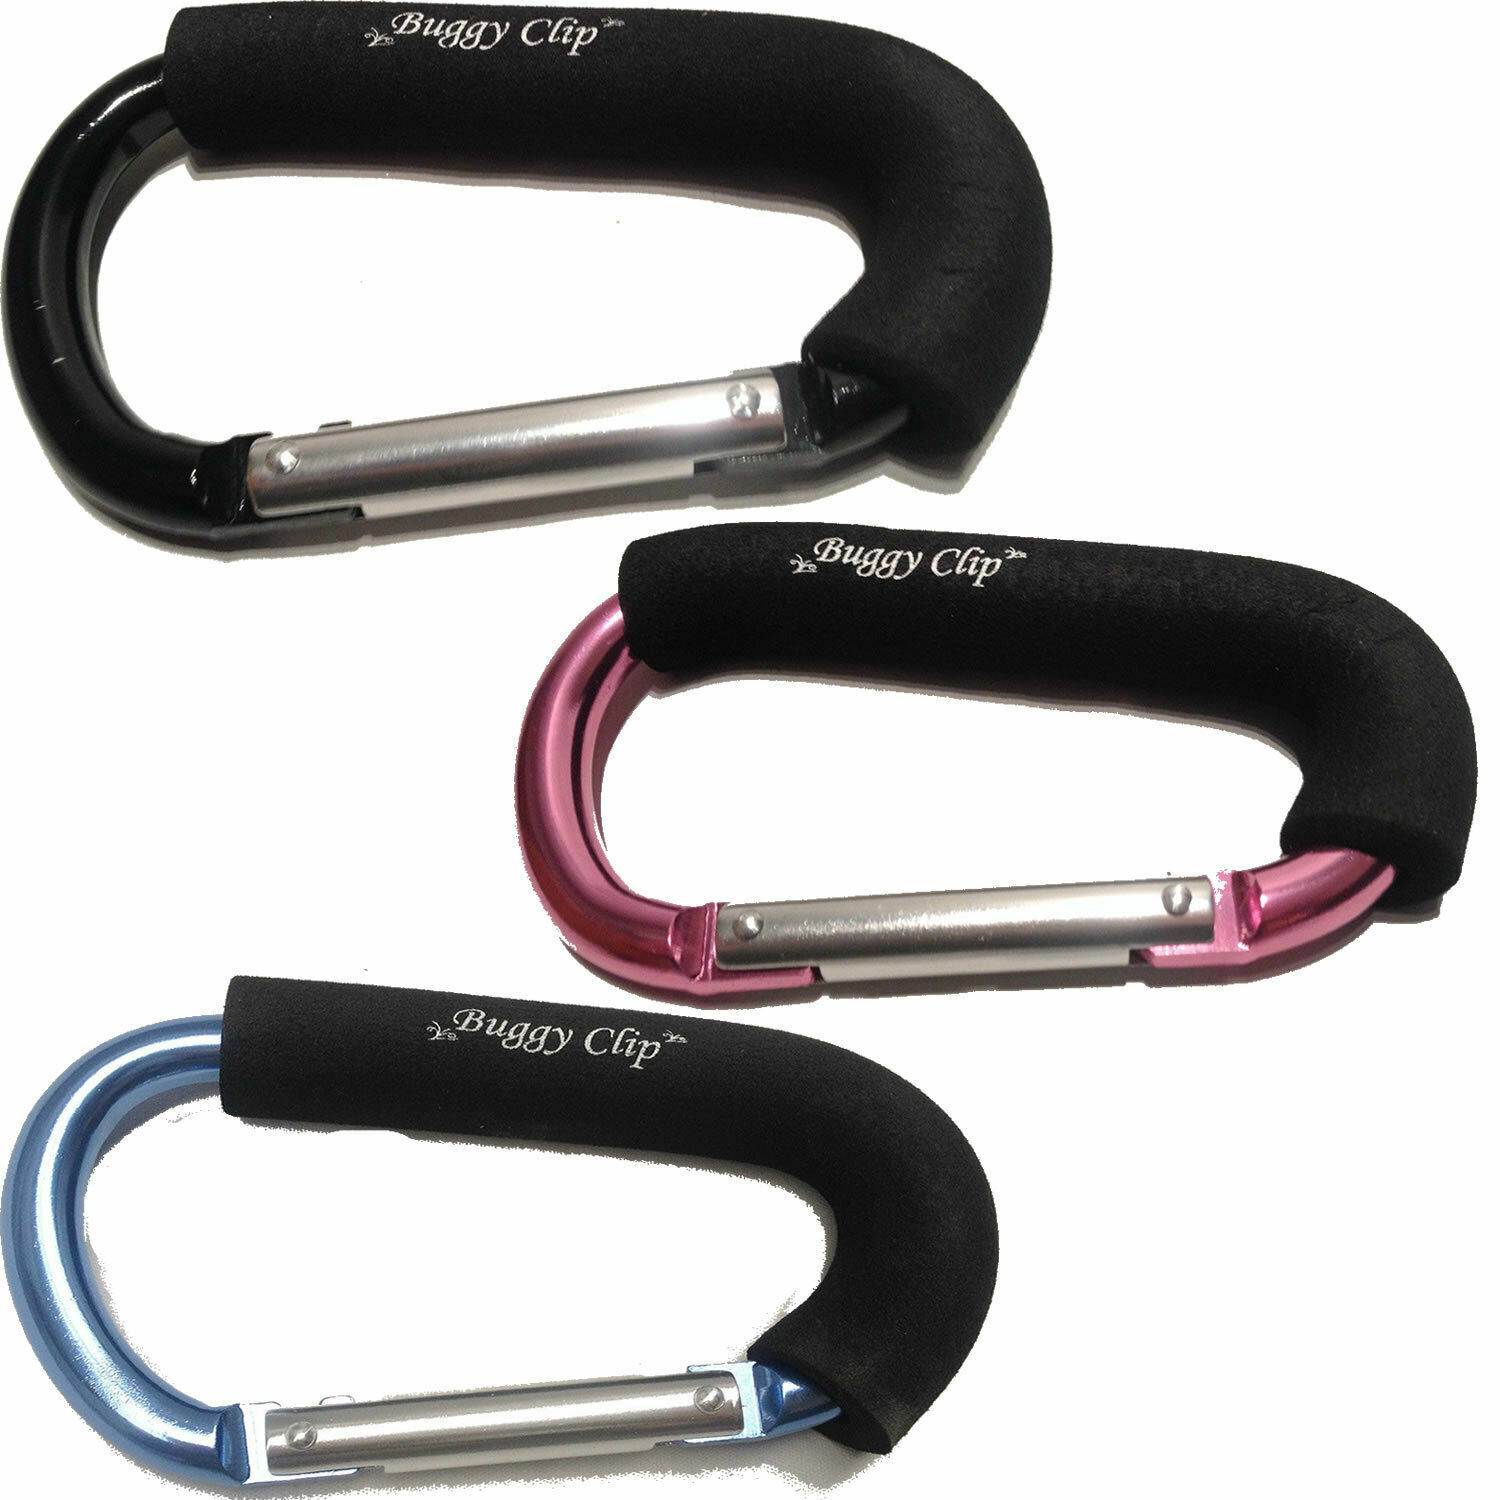 2x Buggy Clip/Buggy Hooks Compatible with Pram/Pushchair/Stroller/Buggy Black 